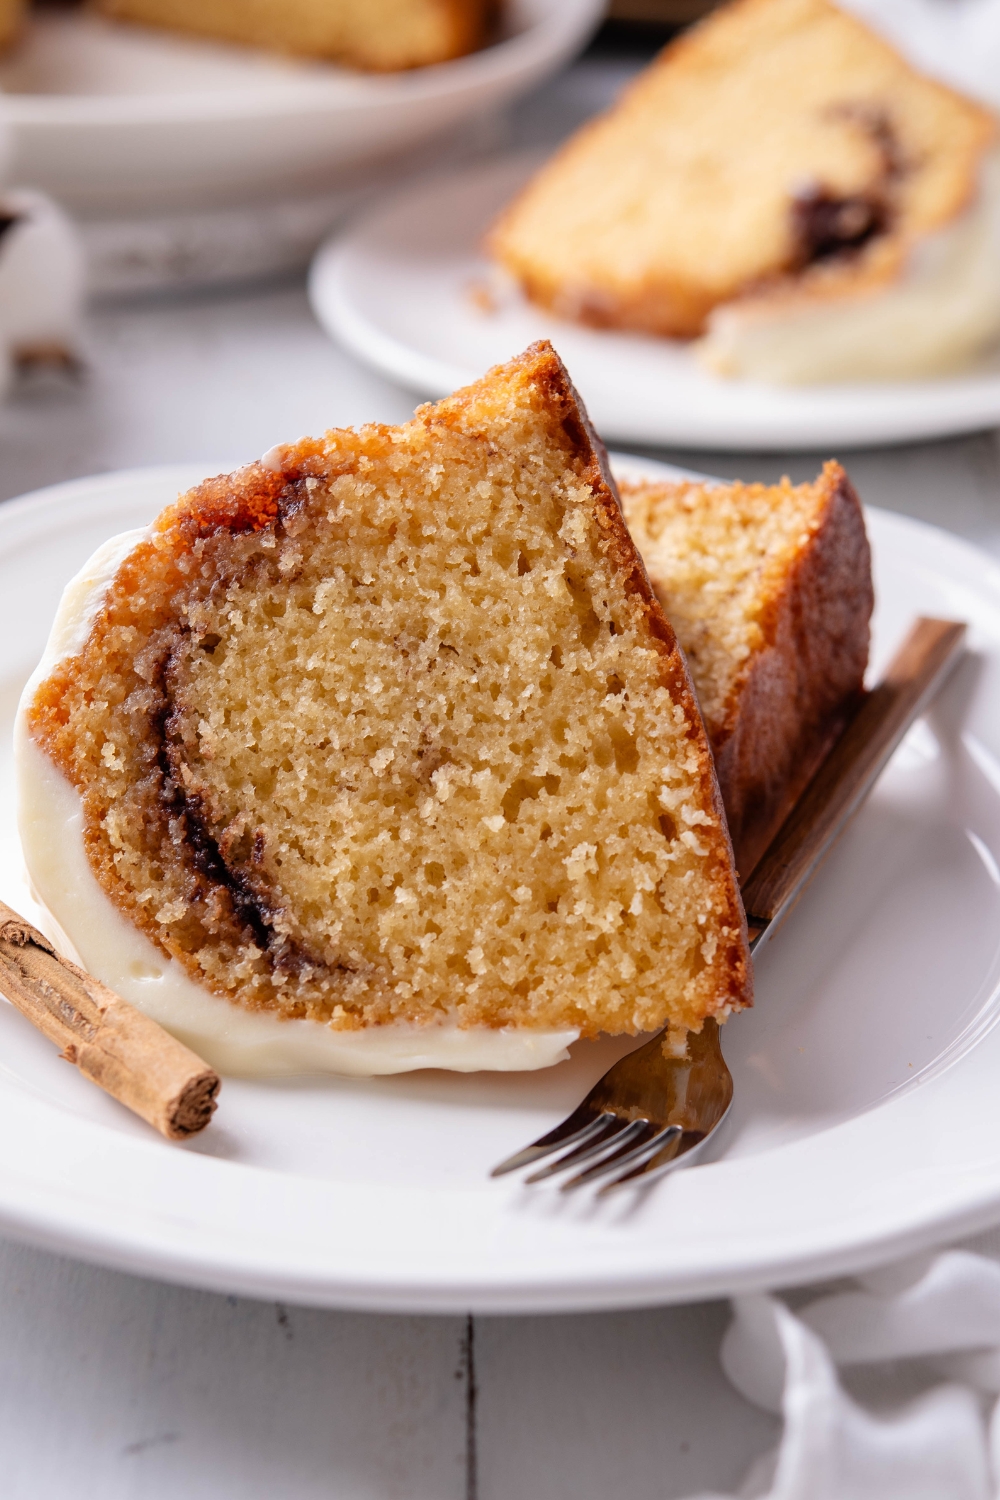 Two slices of cinnamon bundt cake are on a white plate. A fork rests on the plate as well.